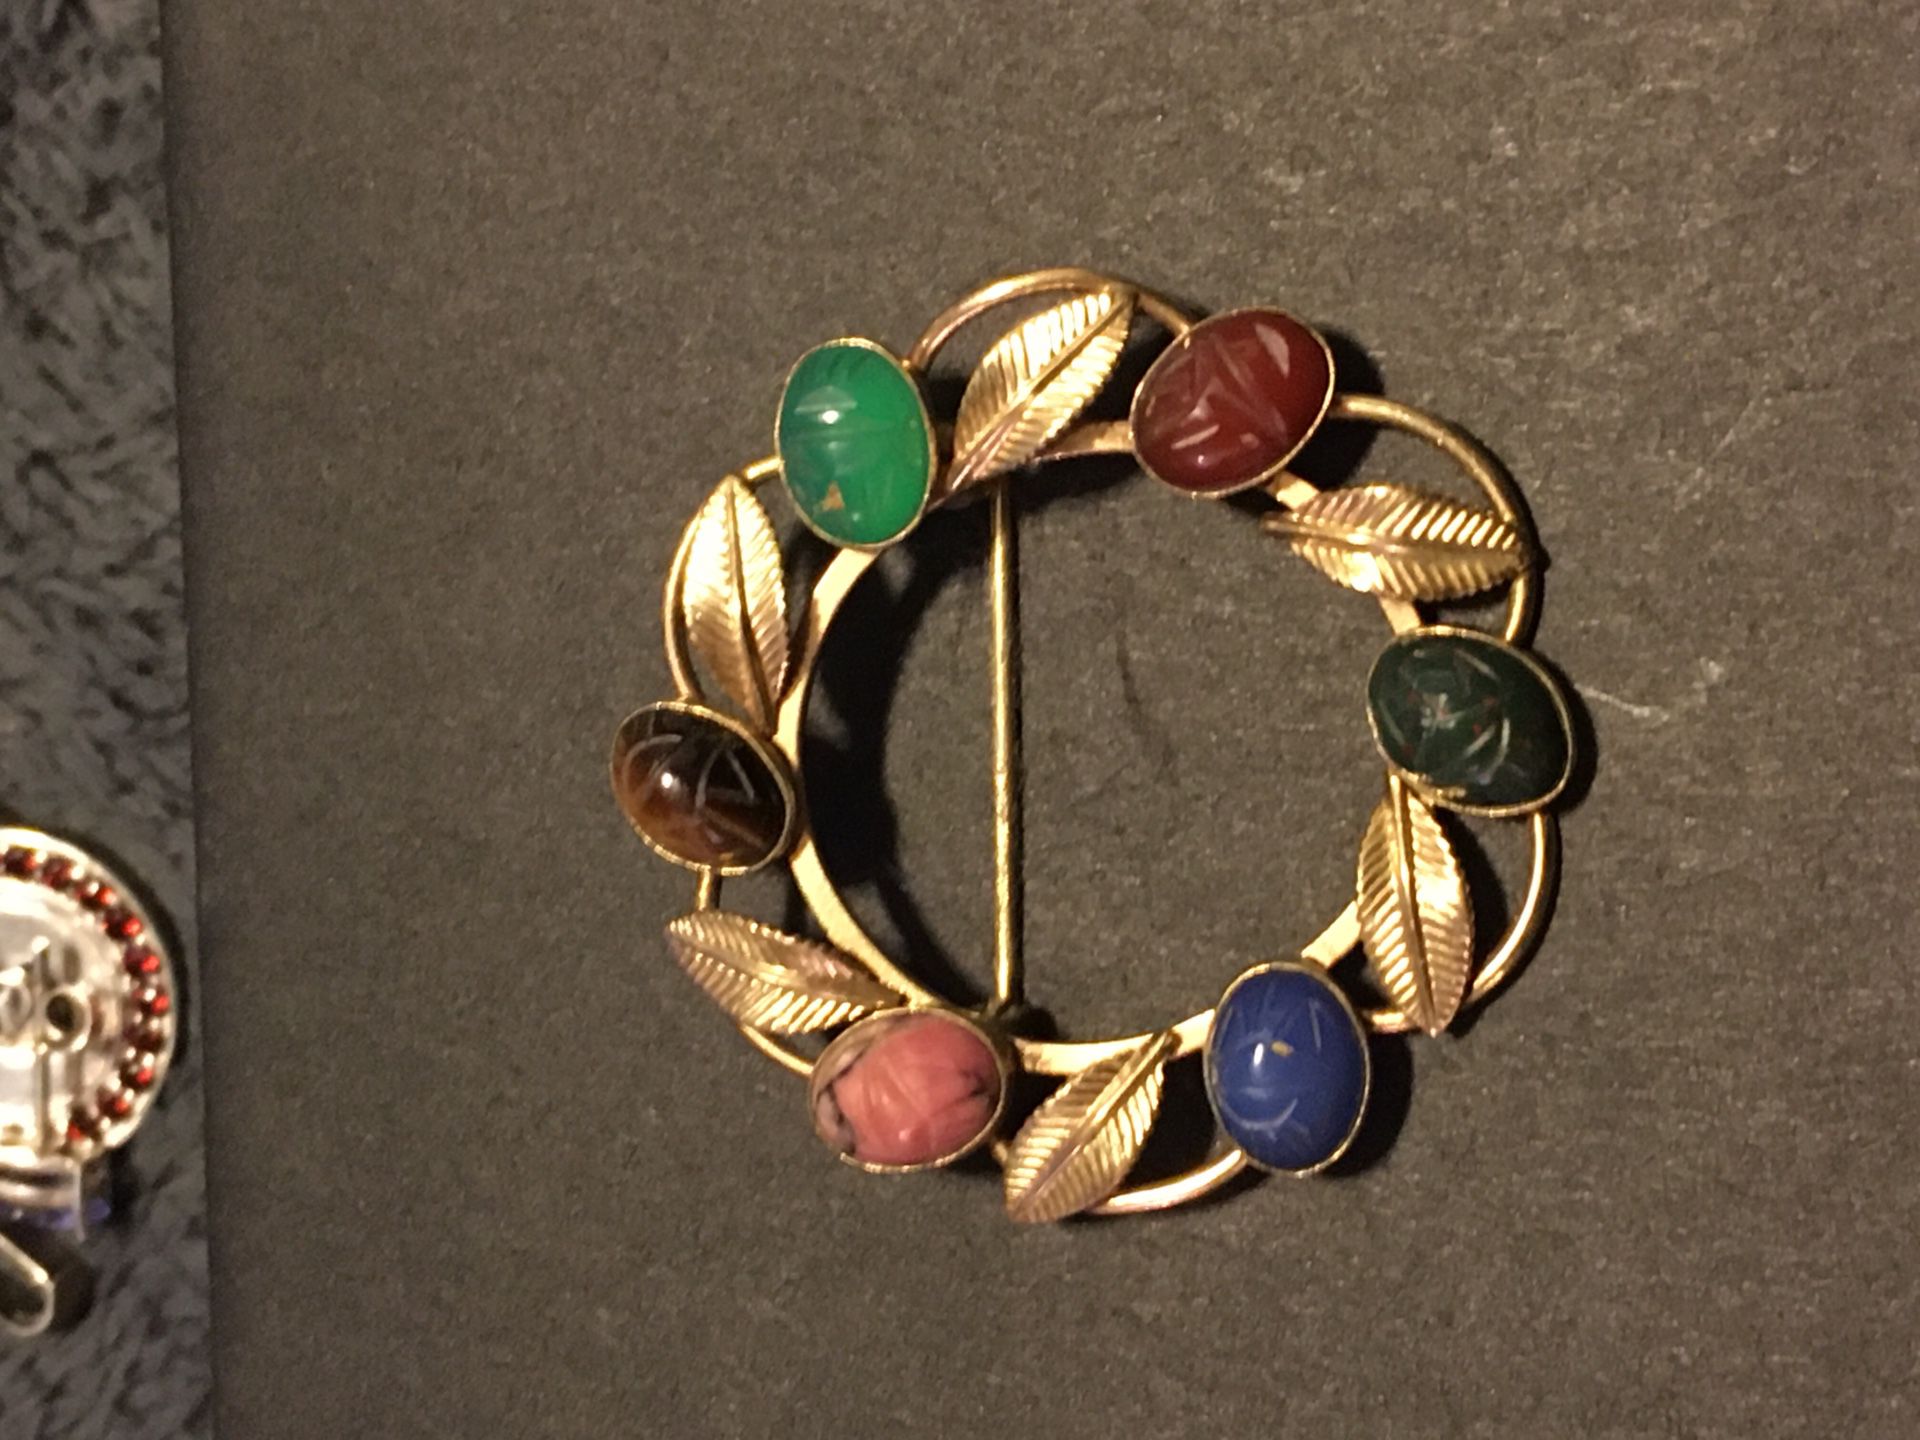 12k gold filled vintage broach with 6 semi precious stone scarabs